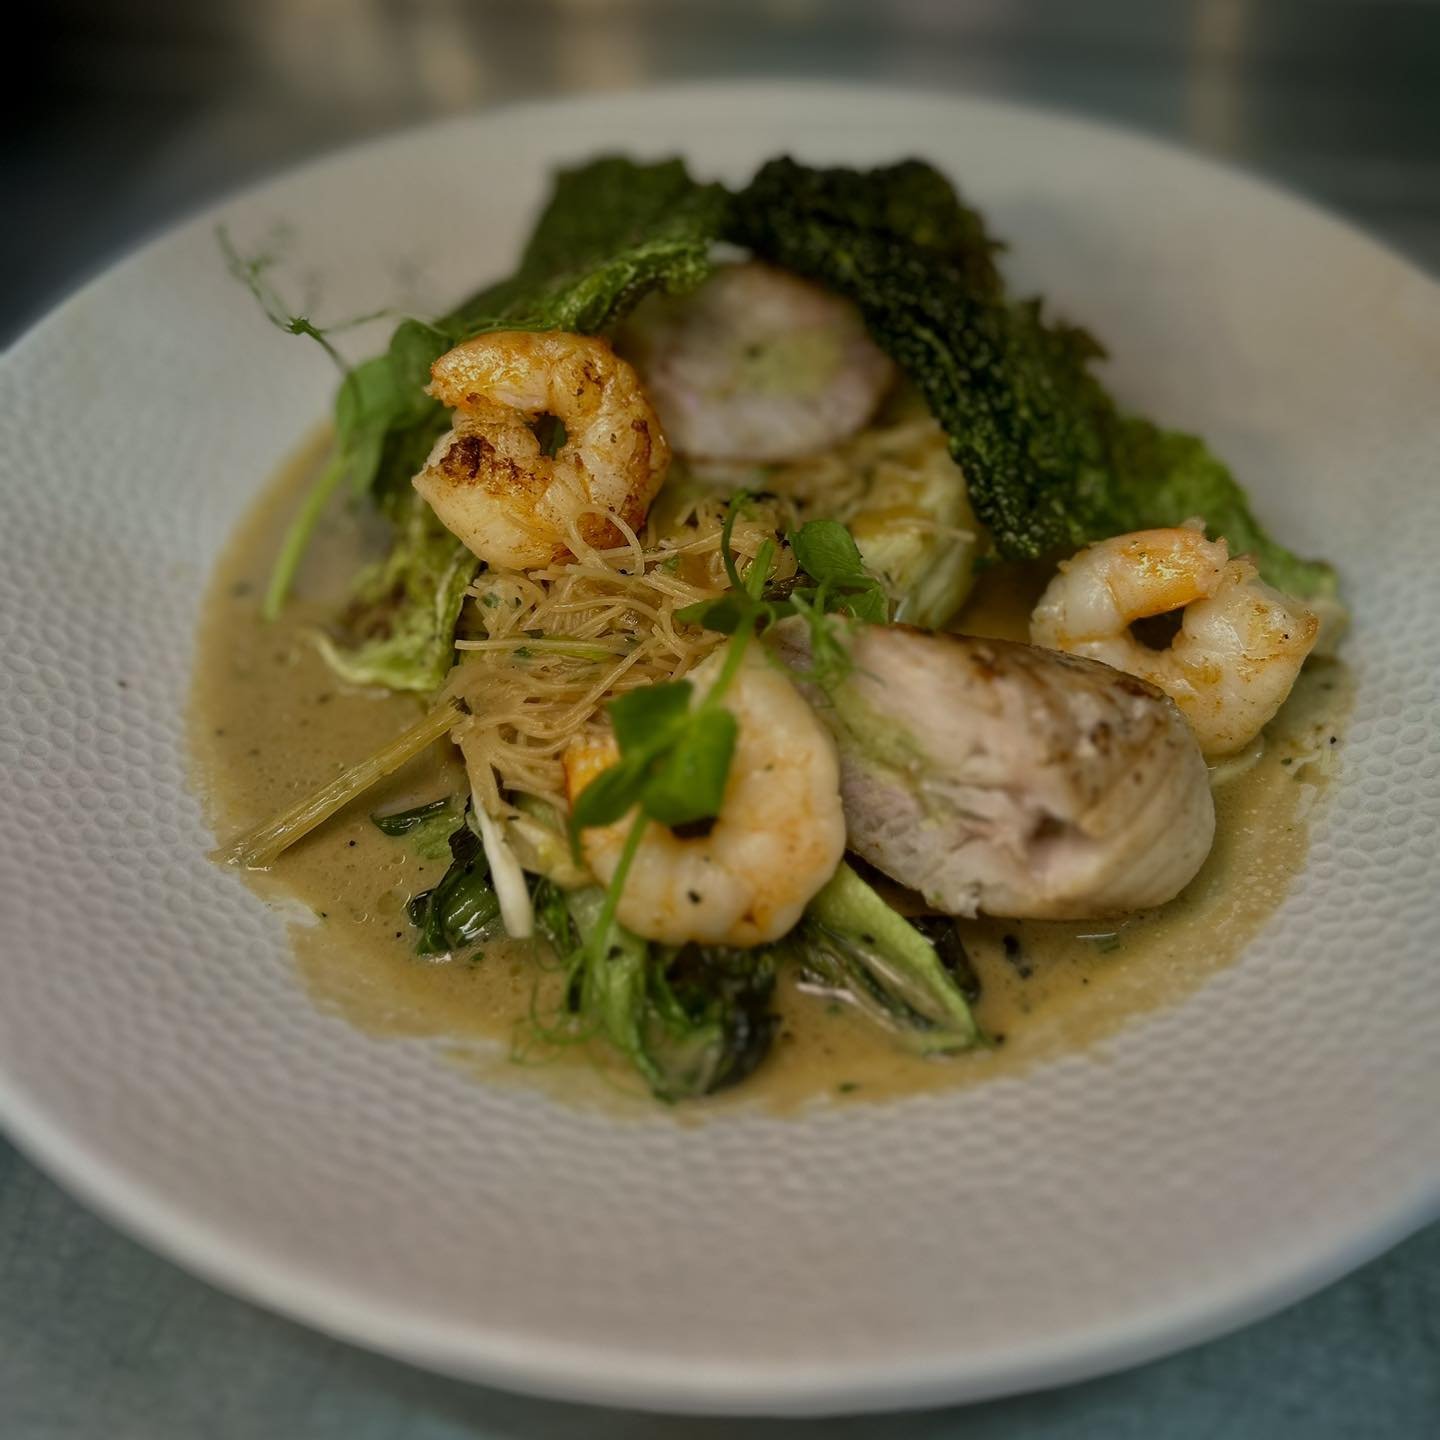 Another mouthwatering special from this week - Wivenhoe landed Hake with a Thai prawn mousse, rice noodles and broth 

#anchorinn #anchorinnpub #anchornayland #Nayland #Naylandsuffolk #suffolkcountyinns #suffolk #suffolkpub #suffolkcountryside #essex